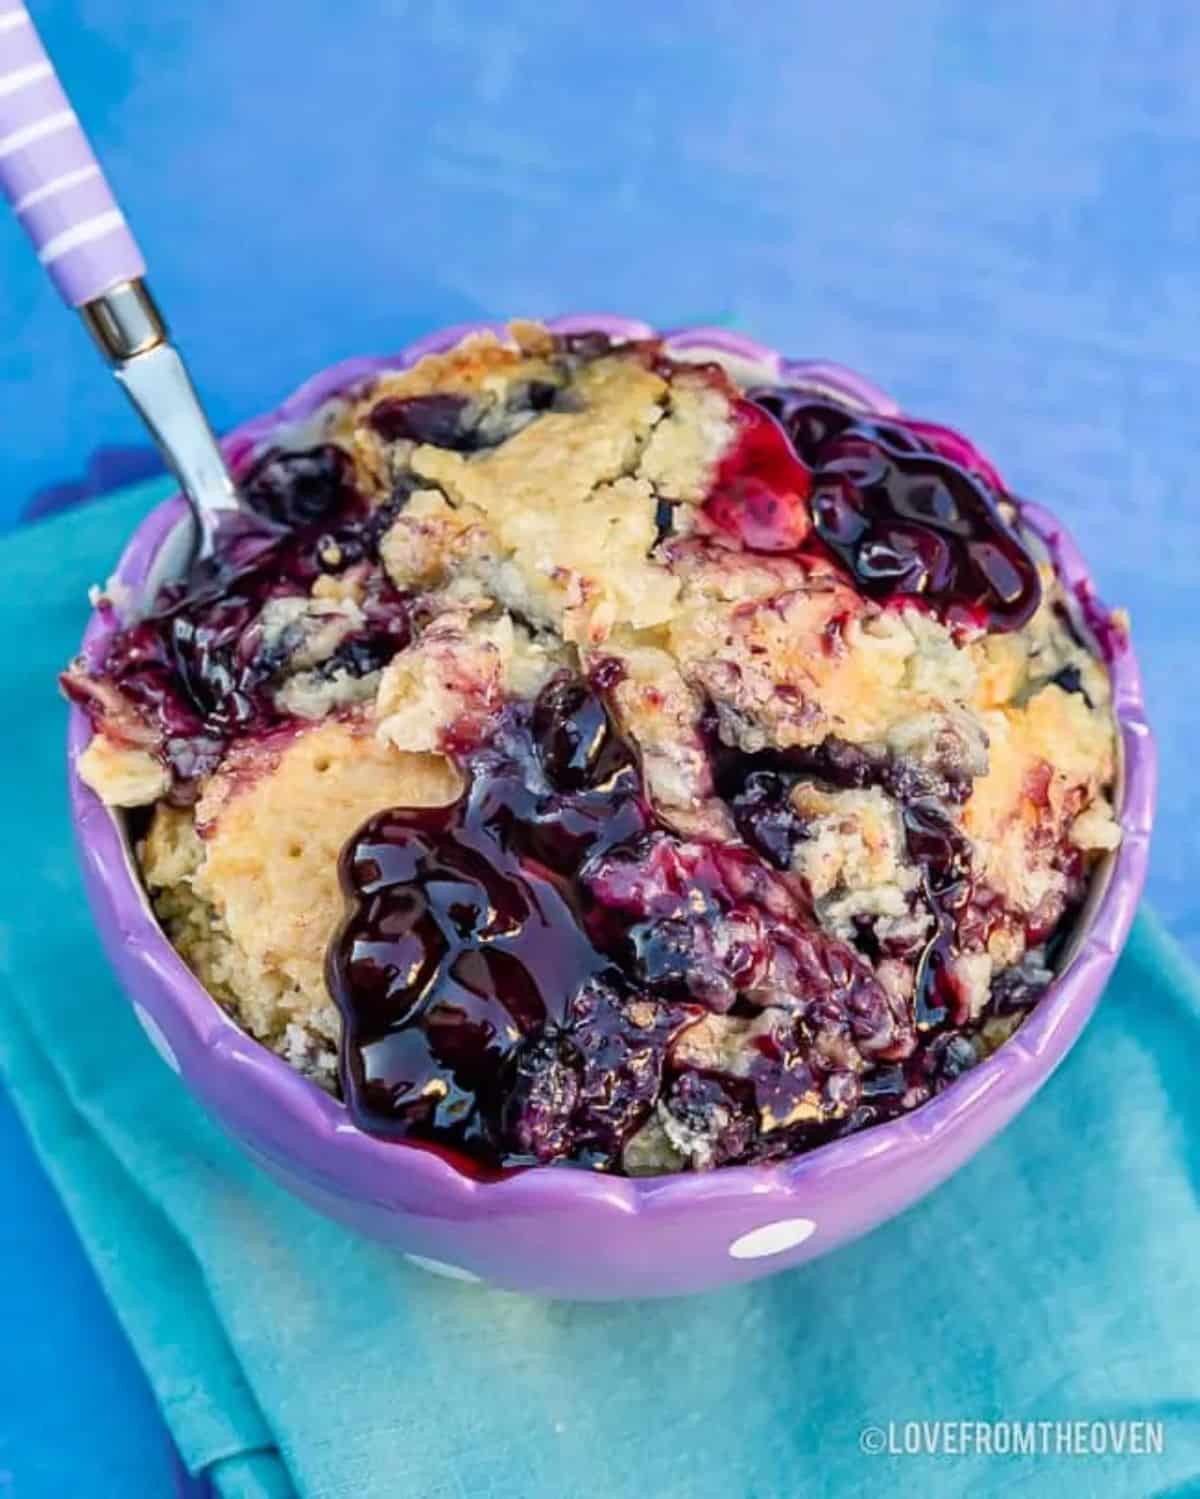 Blueberry dump cake in a purple bowl with a spoon.